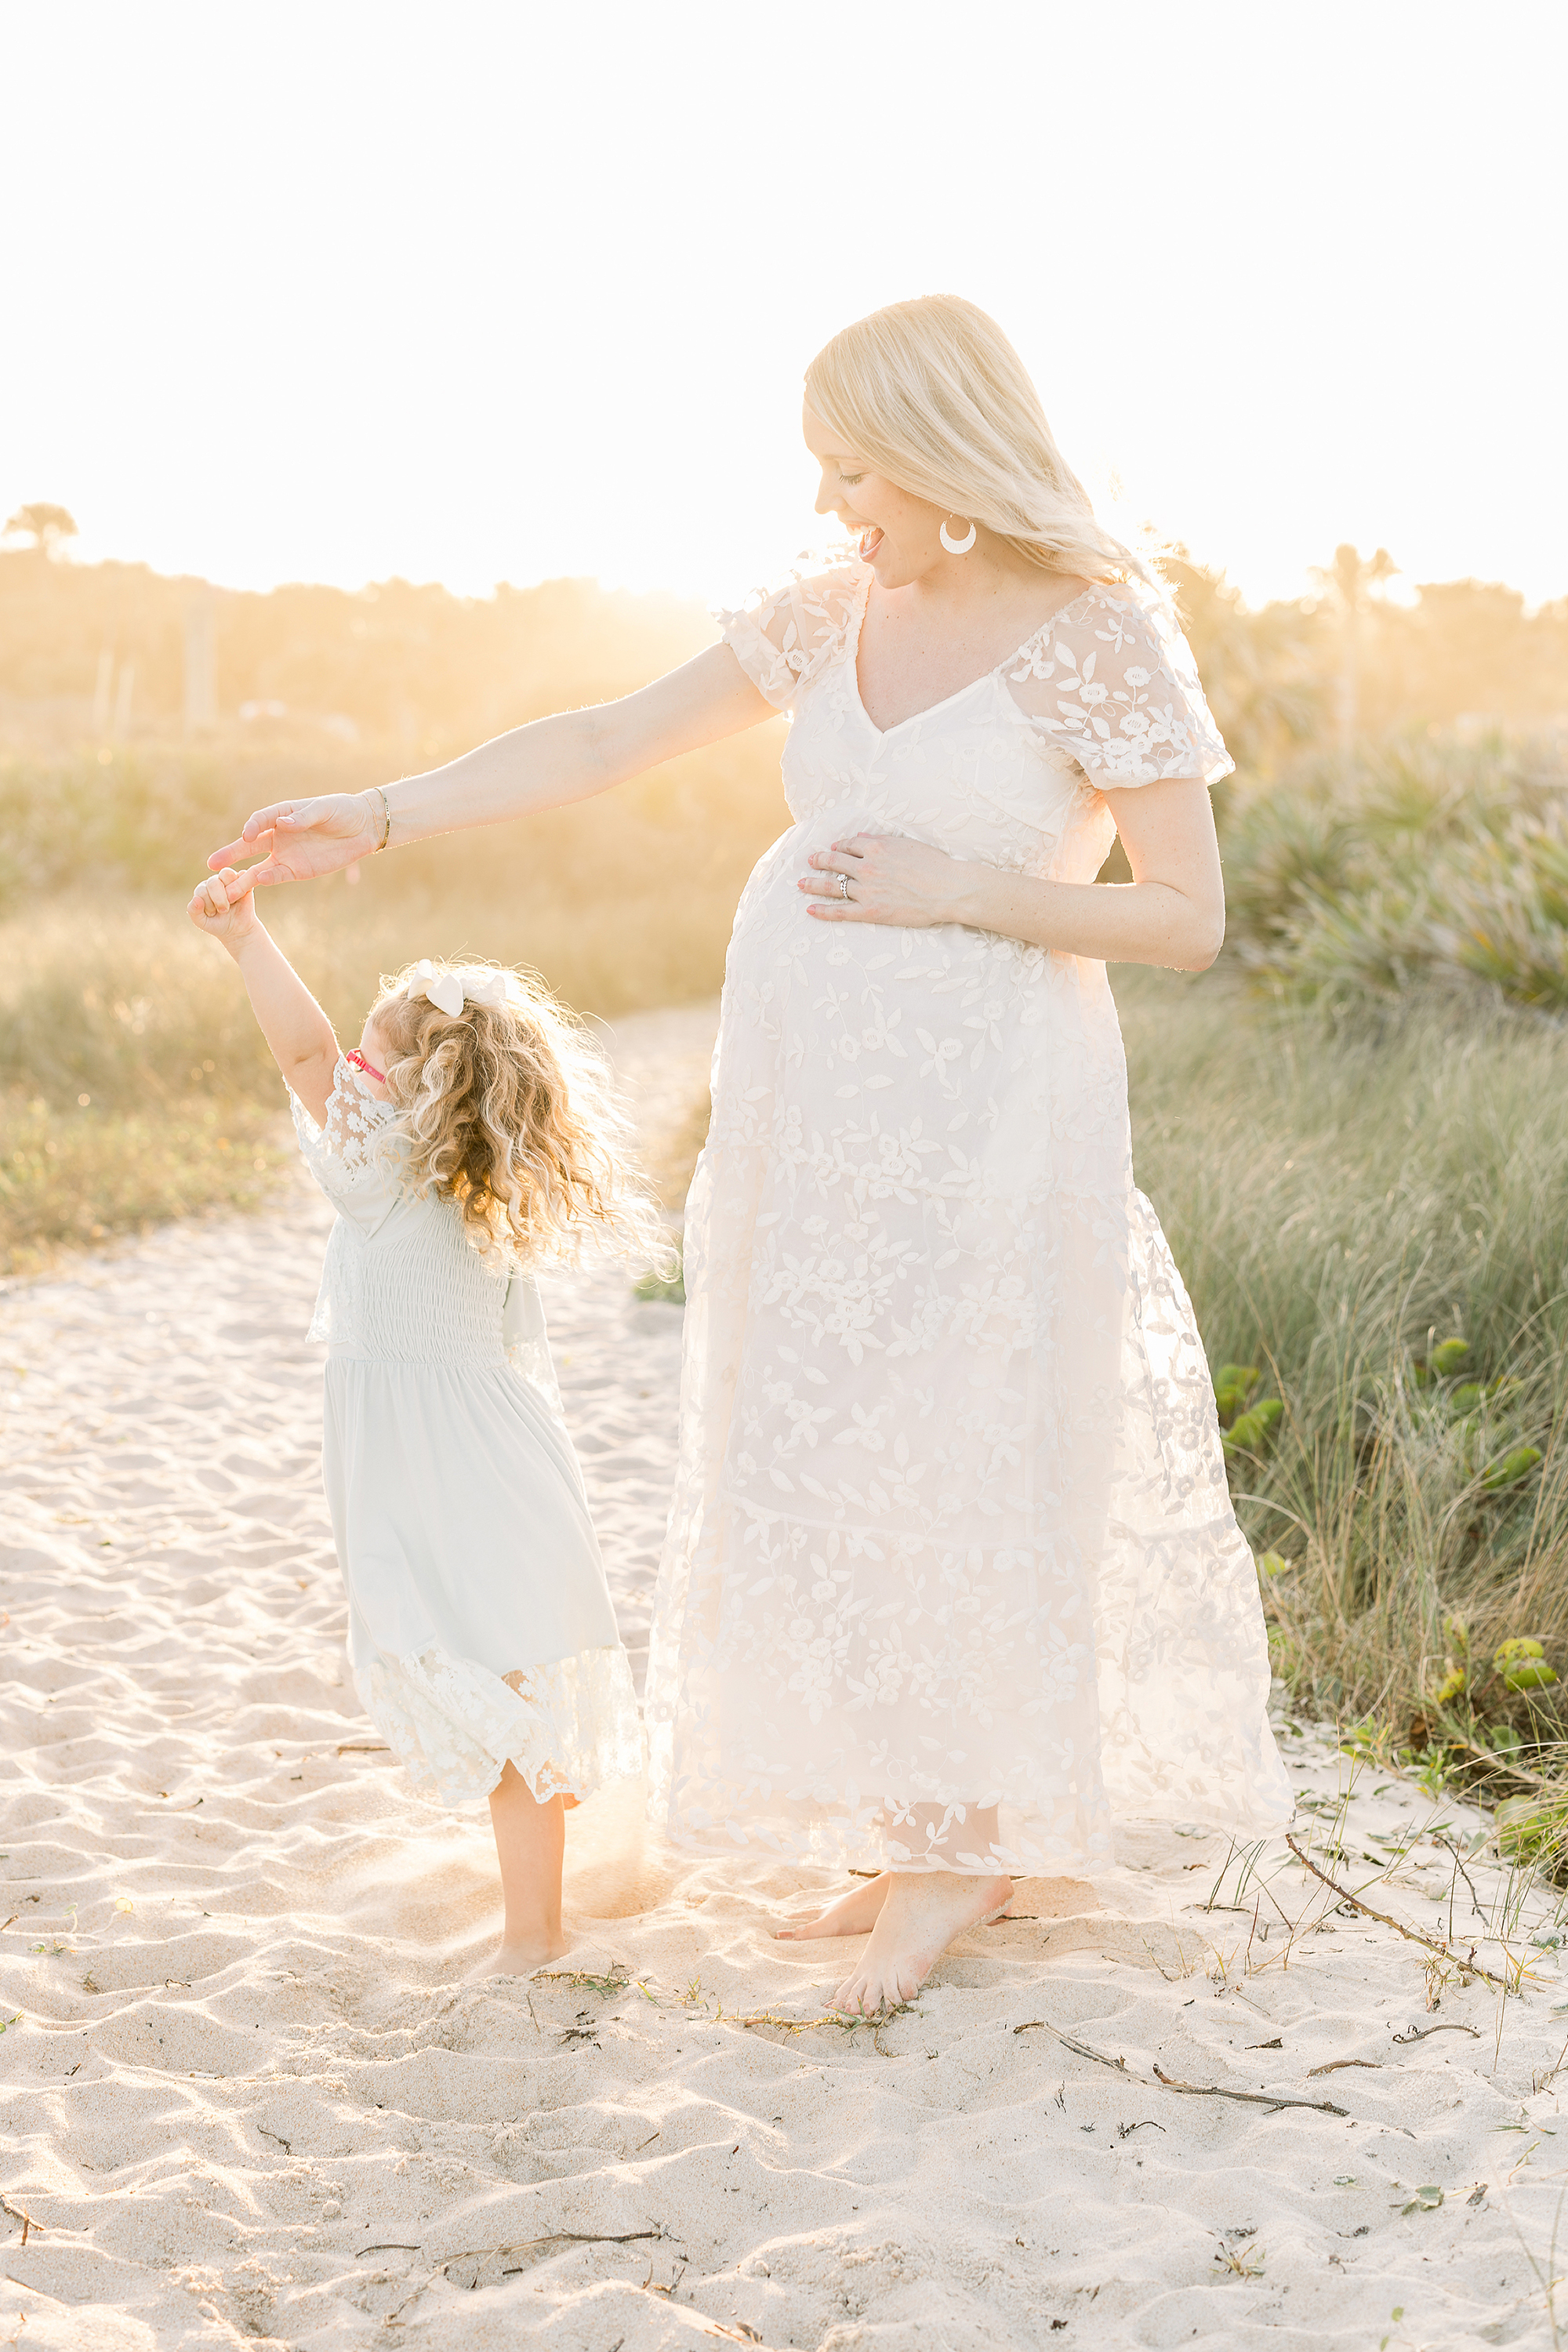 A sunset maternity portrait of a woman and her child on the beach.